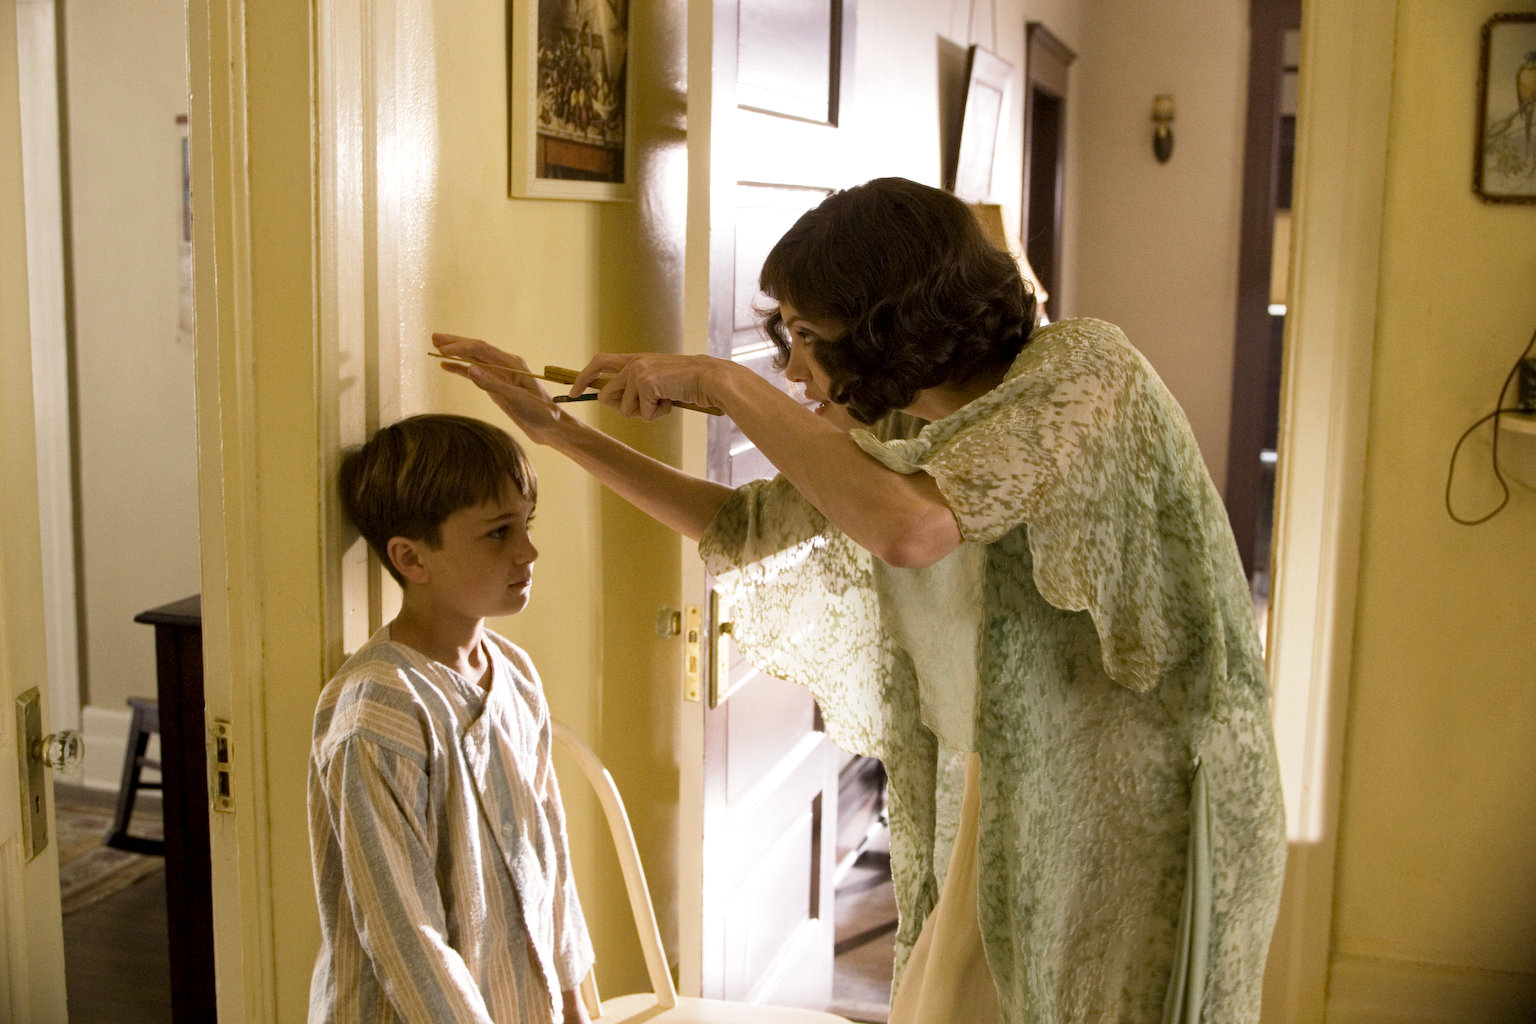 Gattlin Griffith stars as Walter Collins and Angelina Jolie stars as Christine Collins in Universal Pictures' Changeling (2008)